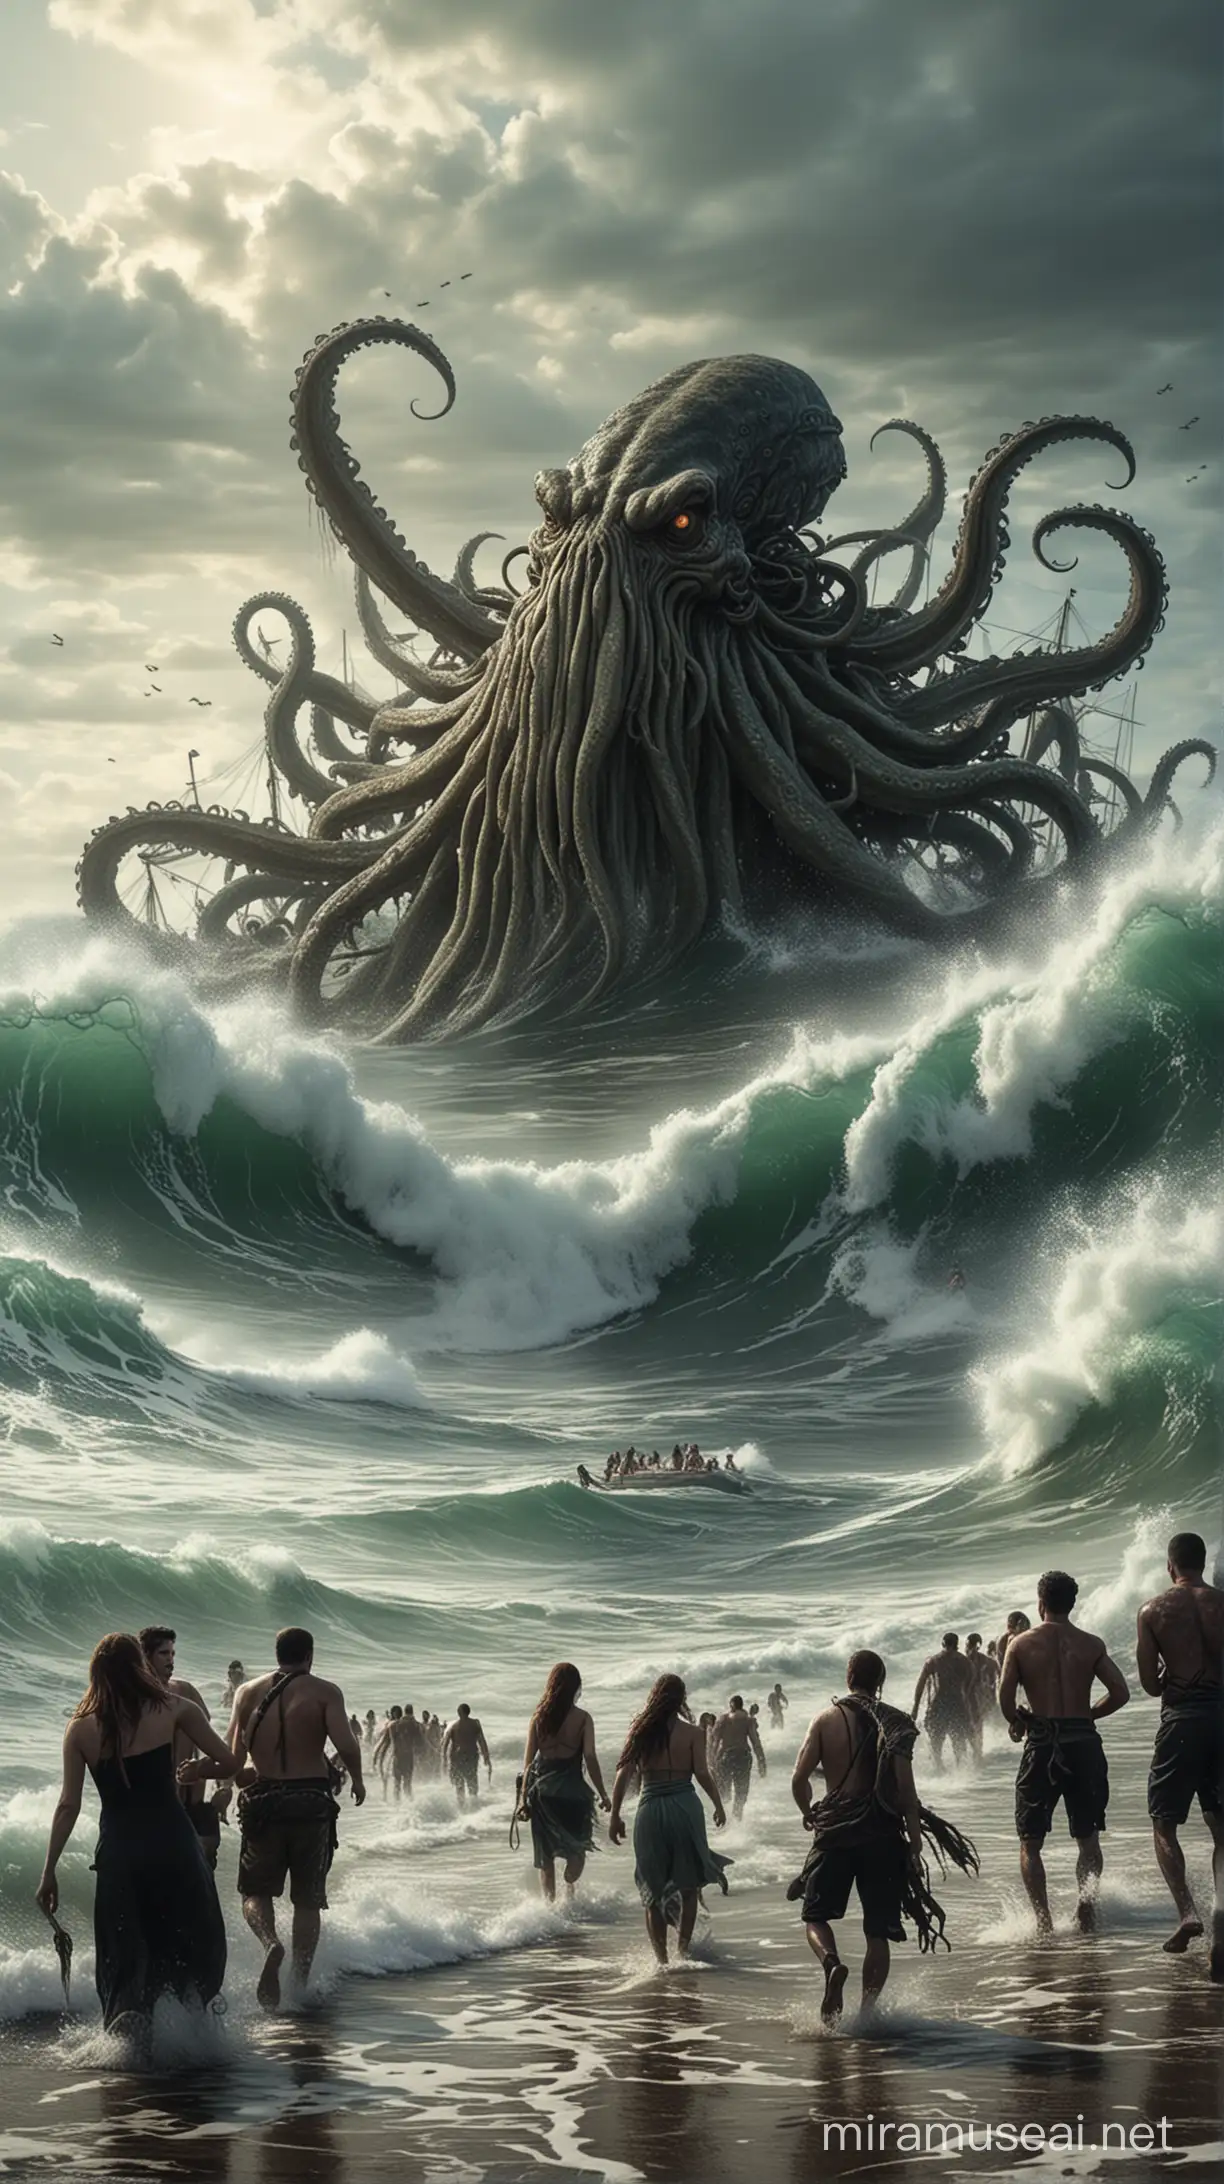 The kraken and many people ,the beach, people run and scare,waves